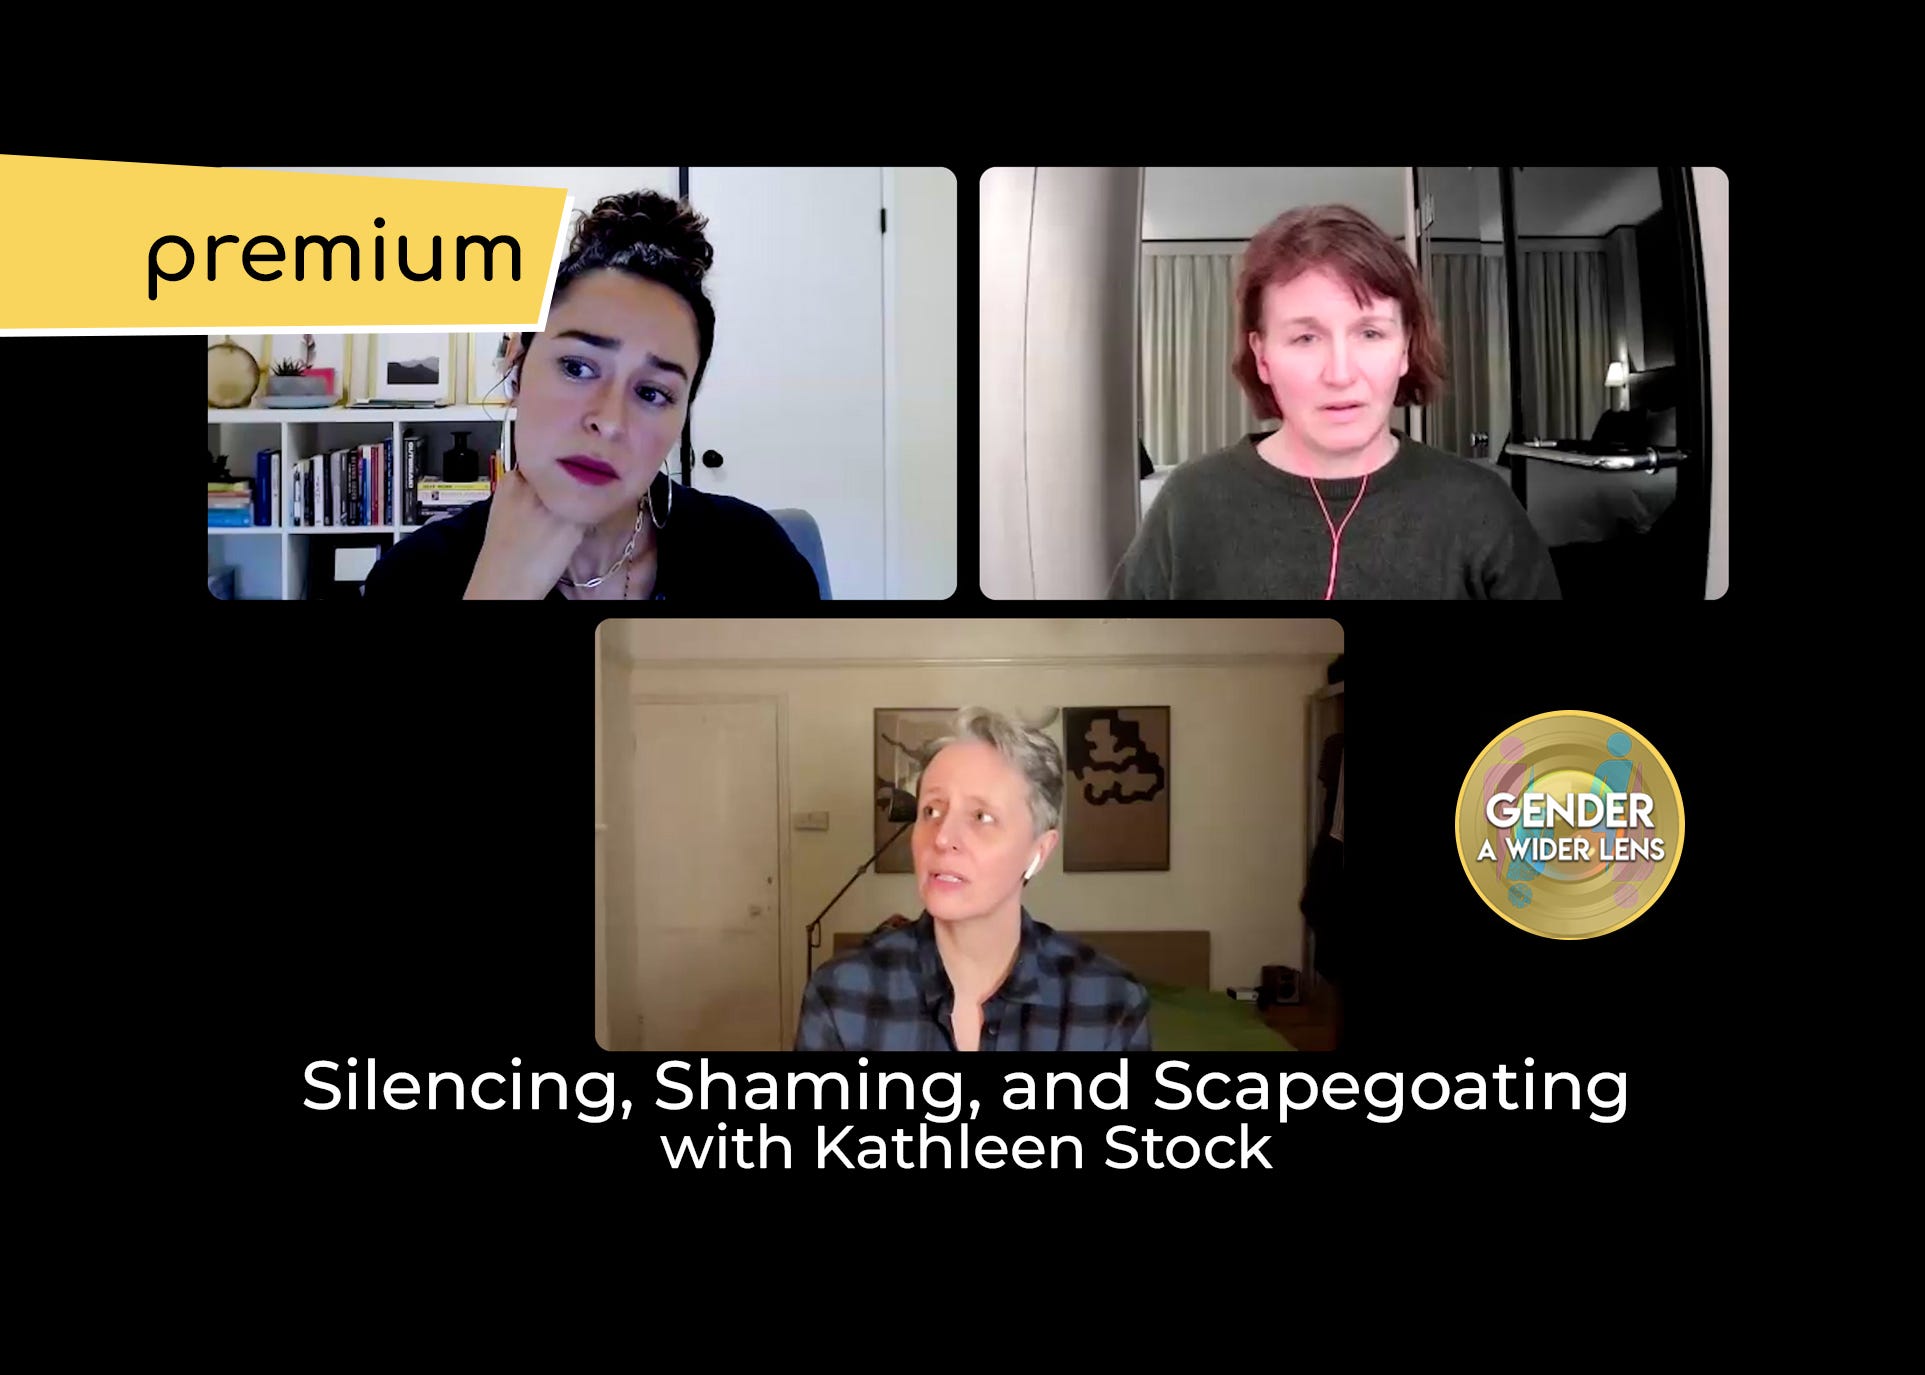 Premium: Silencing, Shaming and Scapegoating with Kathleen Stock